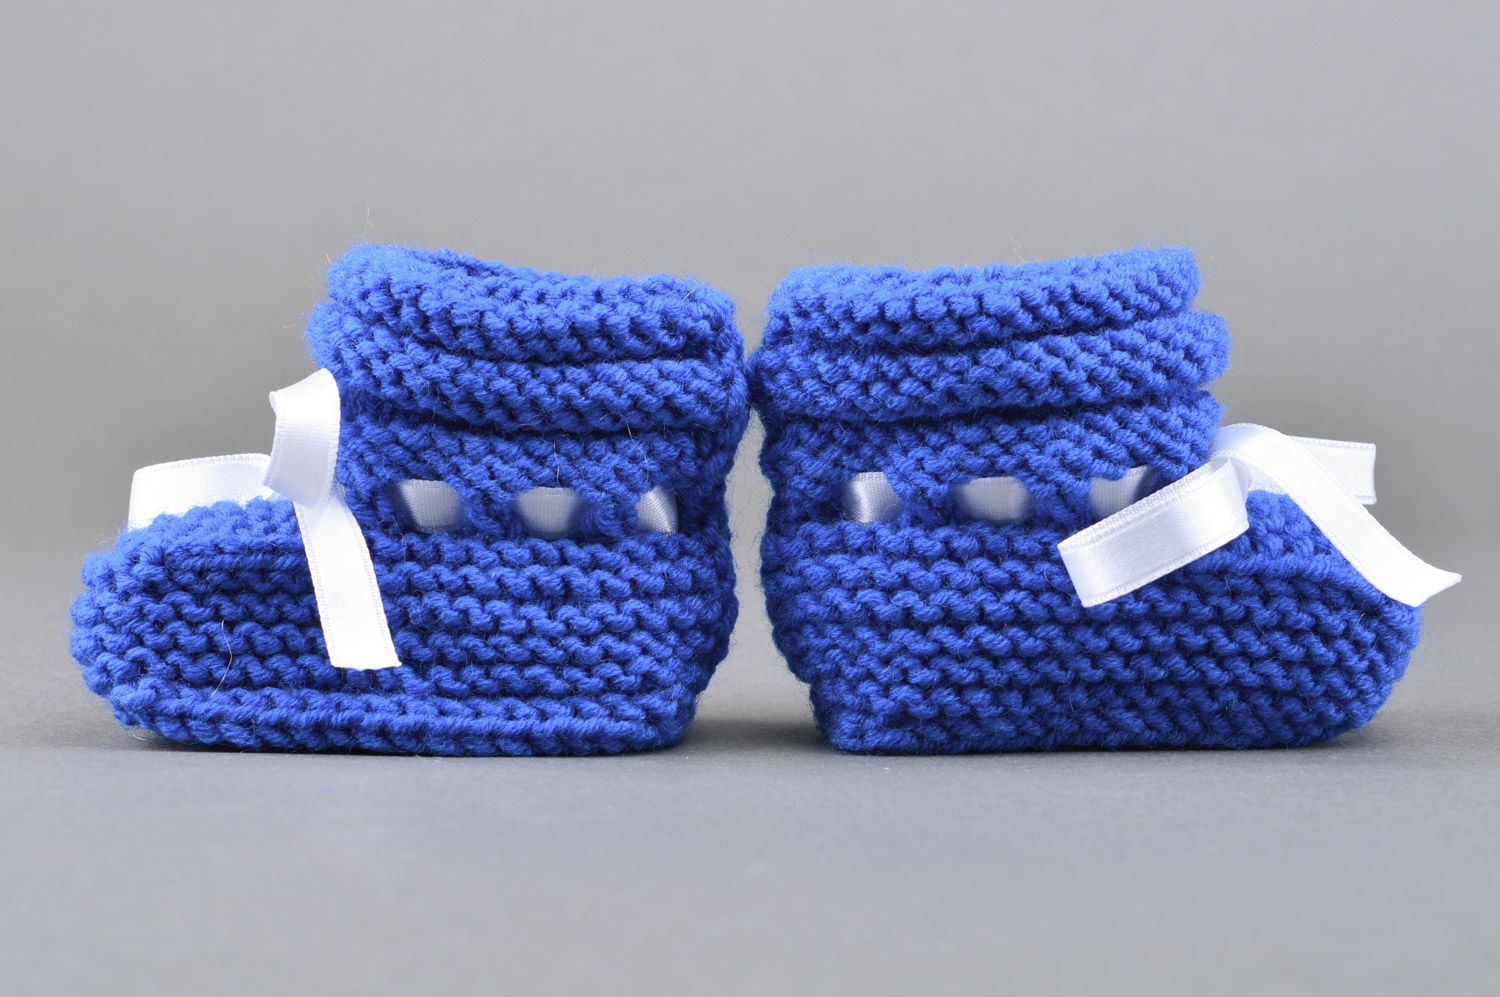 Handmade baby booties knitted of bright blue semi-woolen threads with satin bow photo 2